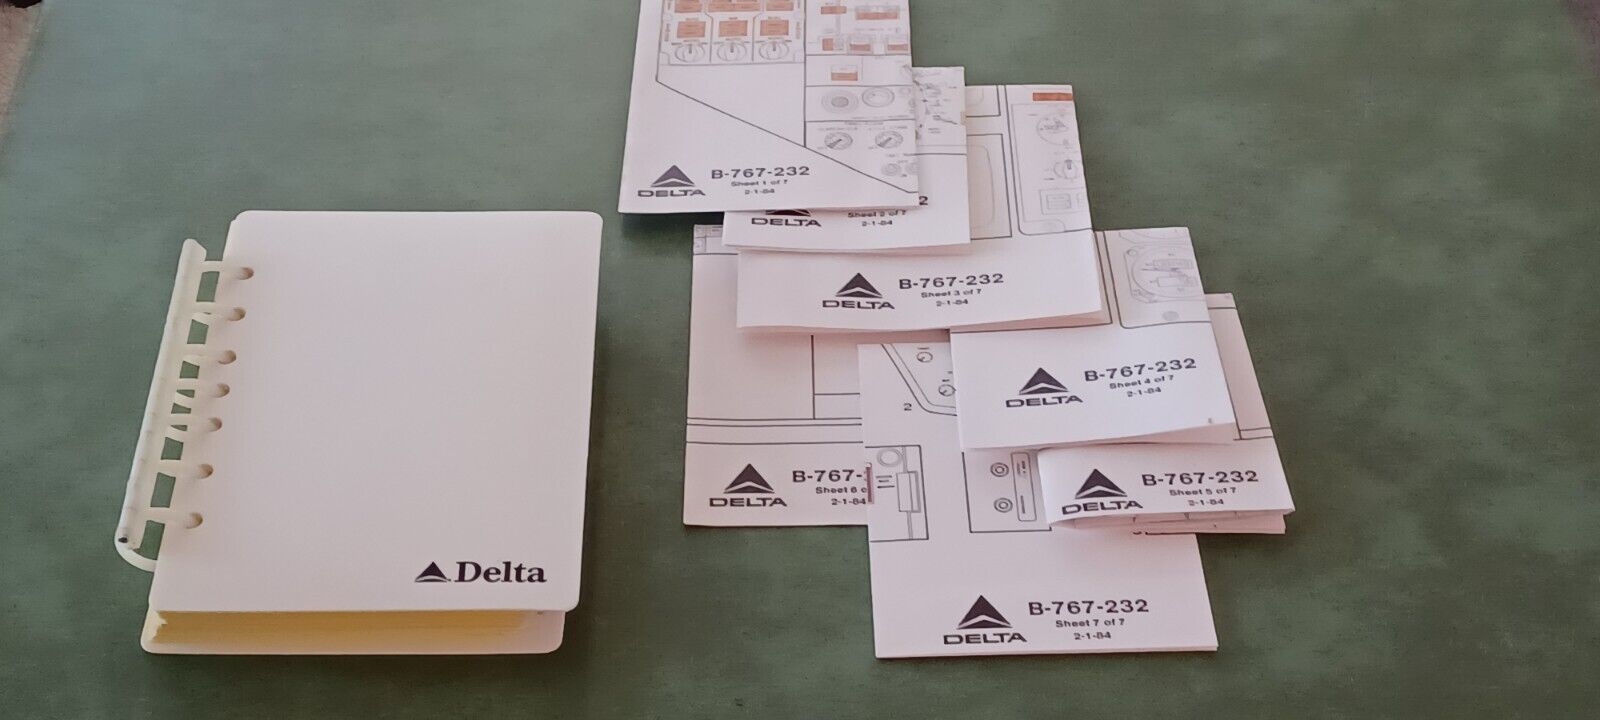 Vintage Delta Airlines 767-400 Operations Manual & 767-232 Panel Sheets Full Set